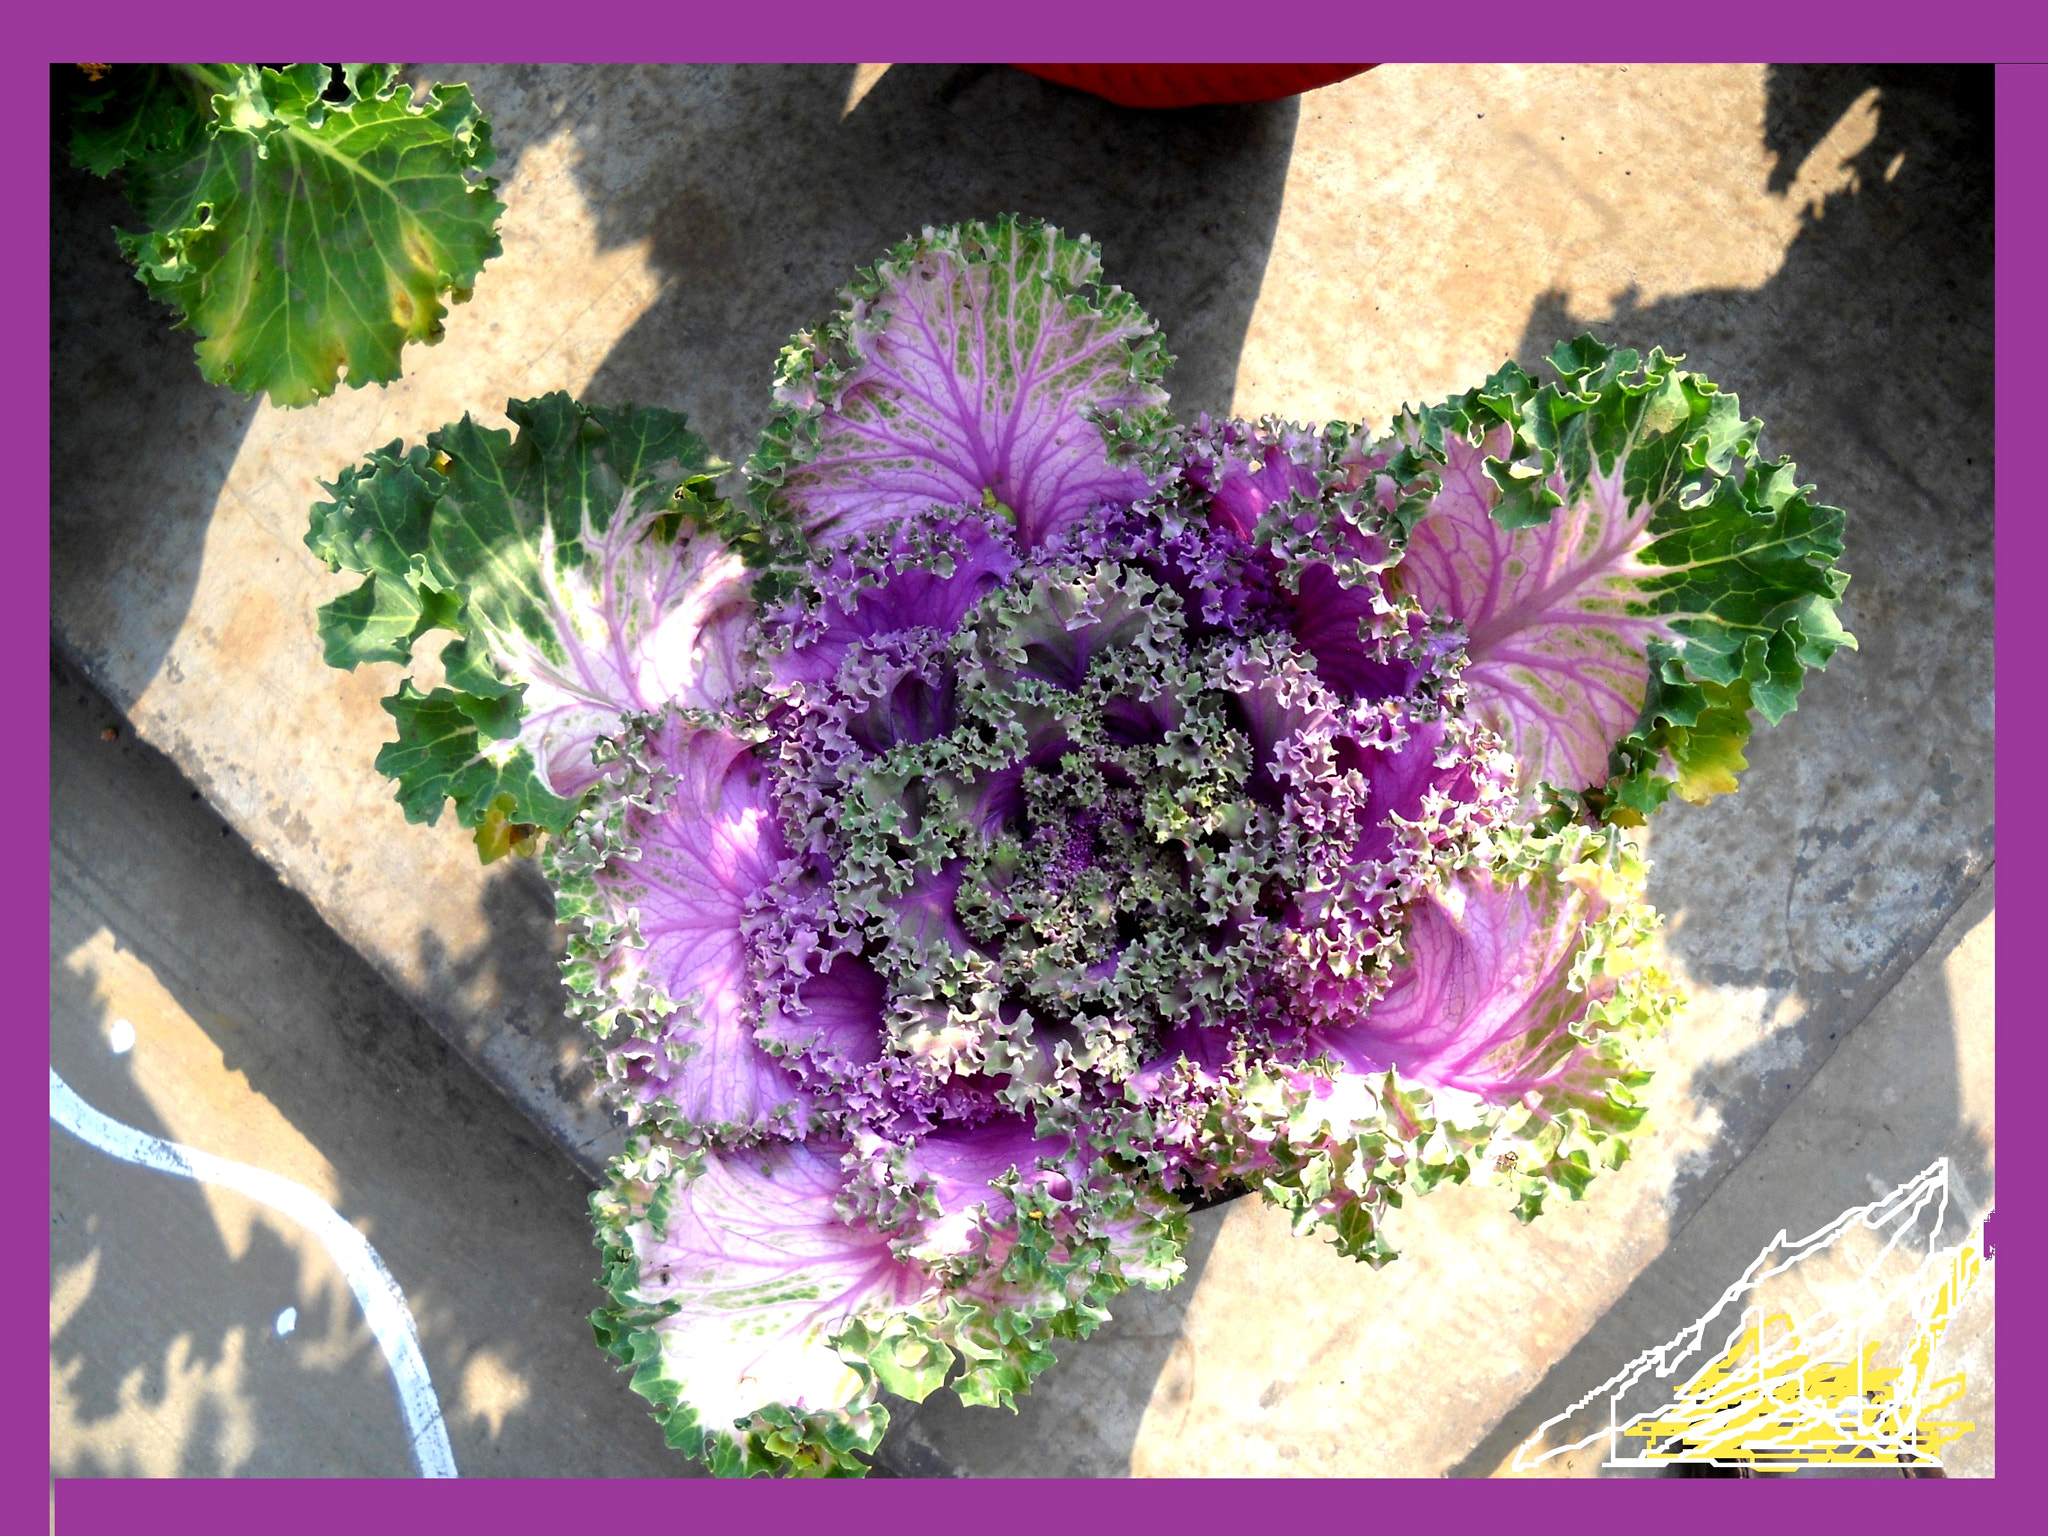 Nikon Coolpix L20 sample photo. Colorful cabbage flower photography